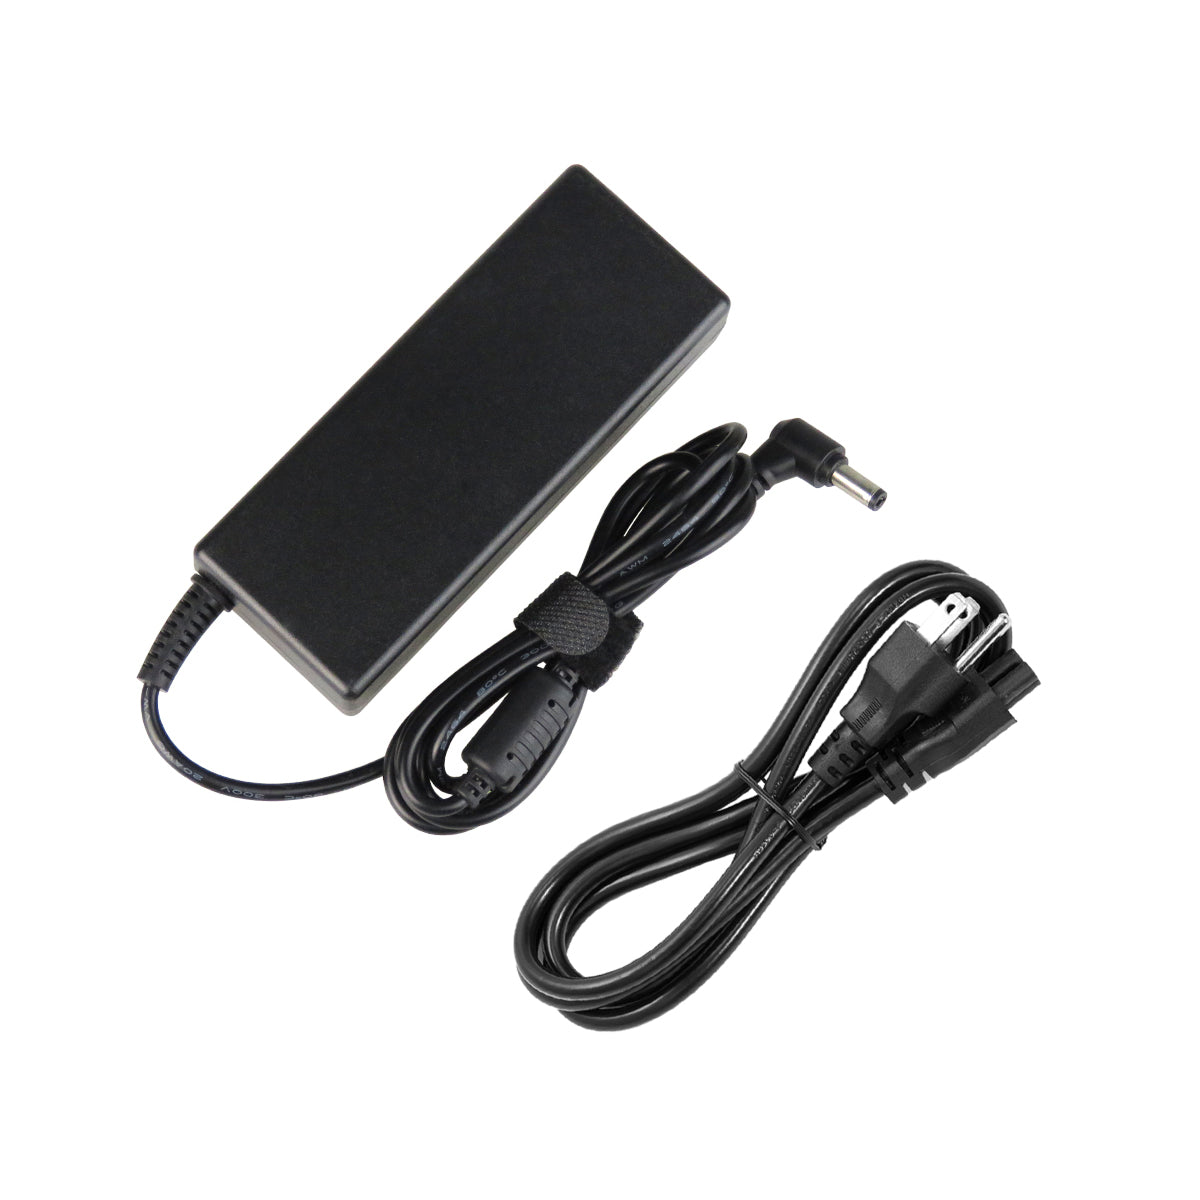 AC Adapter Charger for ASUS A55DE Notebook.